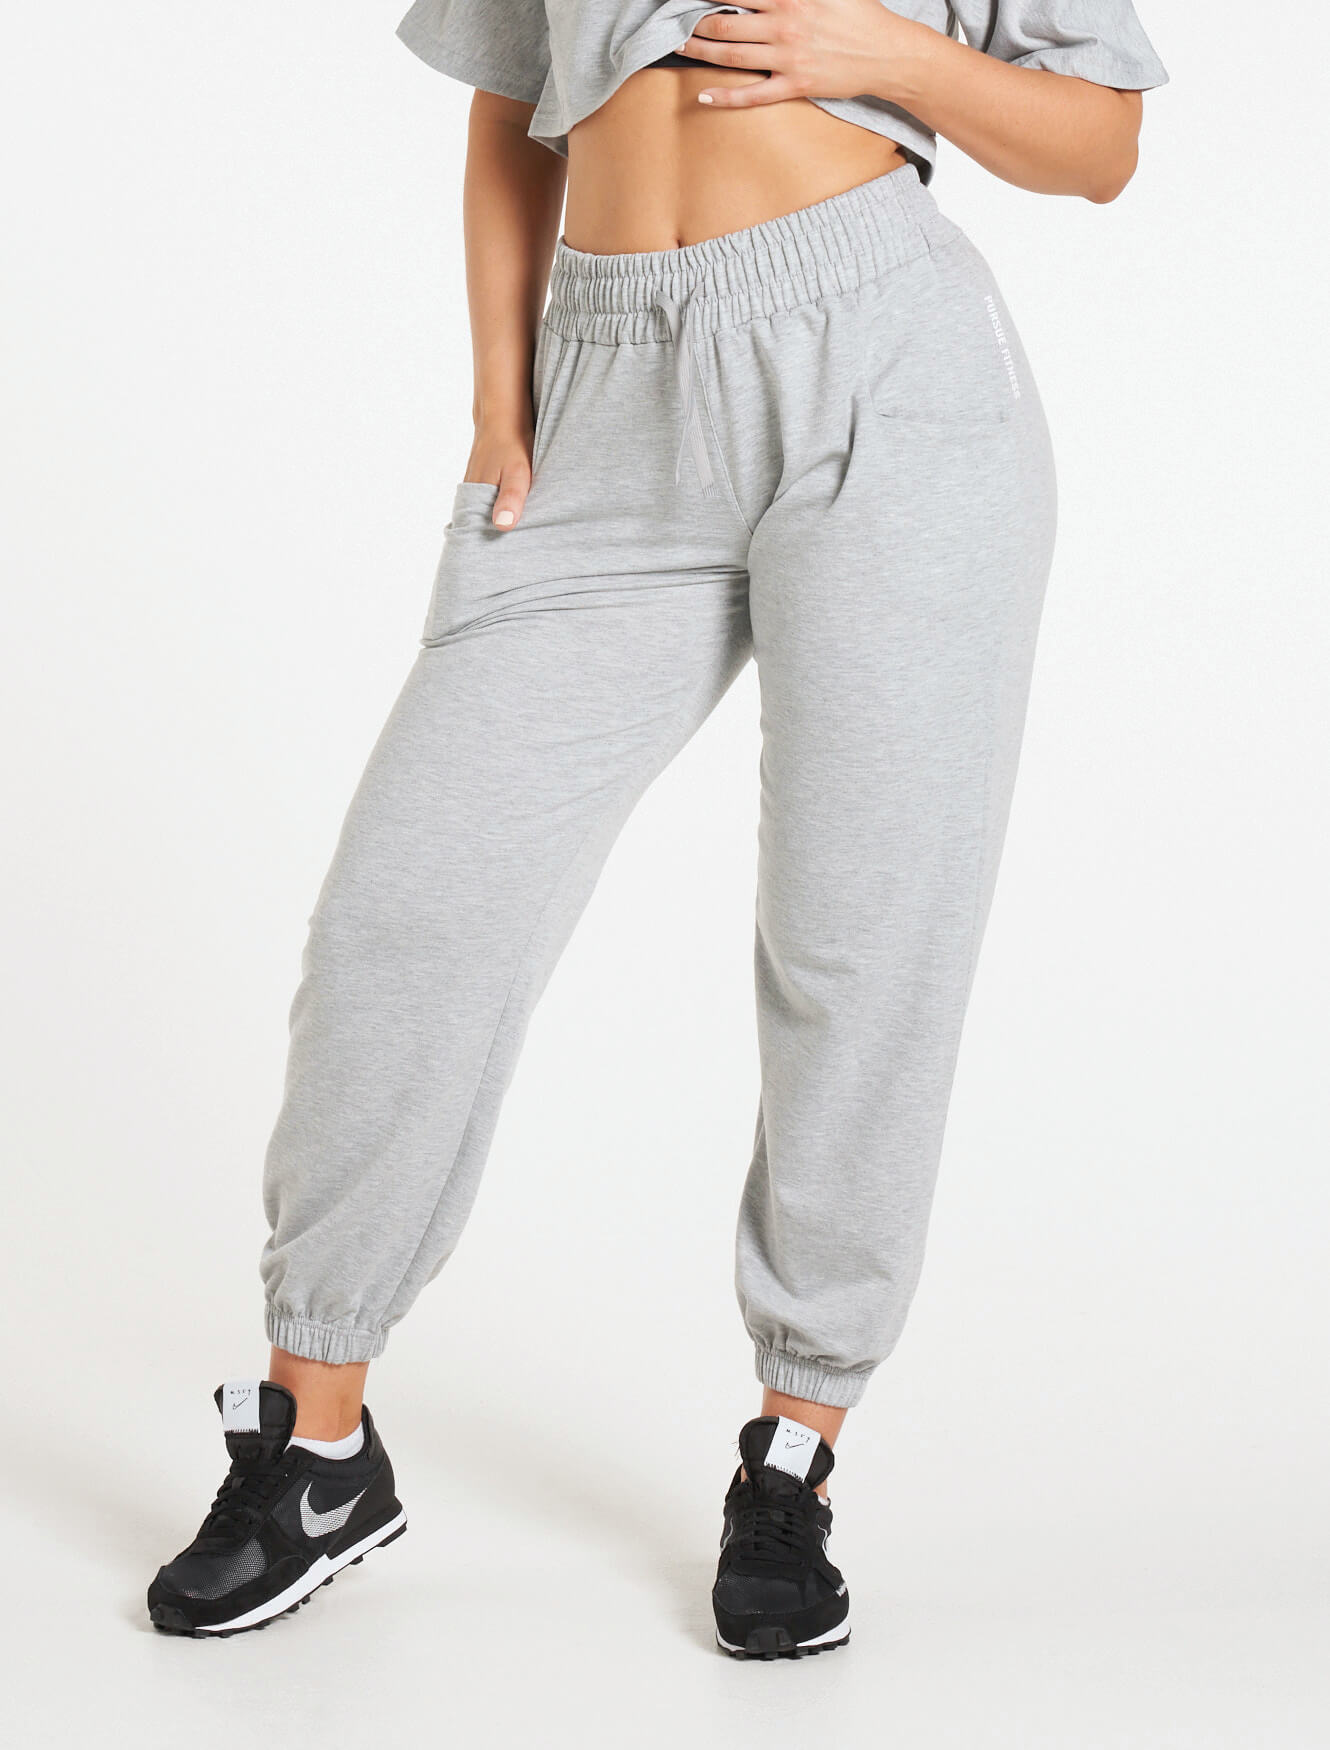 Ease Joggers / Grey Marl Pursue Fitness 2